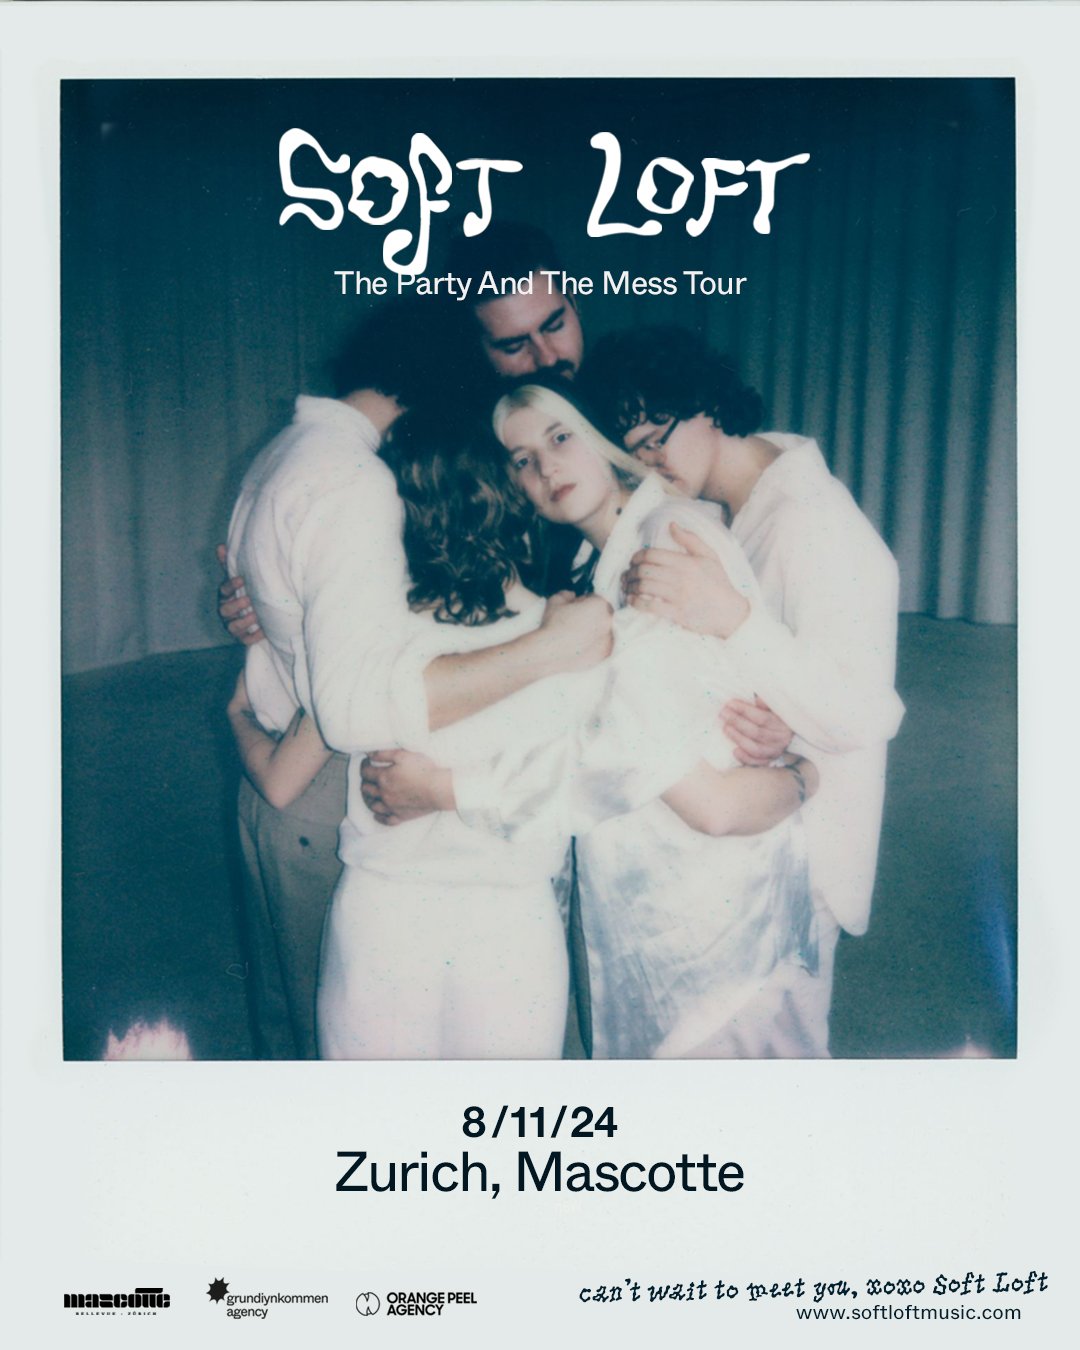 @softloftsoftloft is bringing their celebrated debut album &quot;The Party And The Mess&quot; for an exclusive show to Mascotte Zurich &ndash; we're thrilled! Tickets are available now.
::
📅 08.11.2024 - @mascotte_zurich 
::
ℹ️🎫 𝗠𝗼𝗿𝗲 𝗶𝗻𝗳𝗼 +